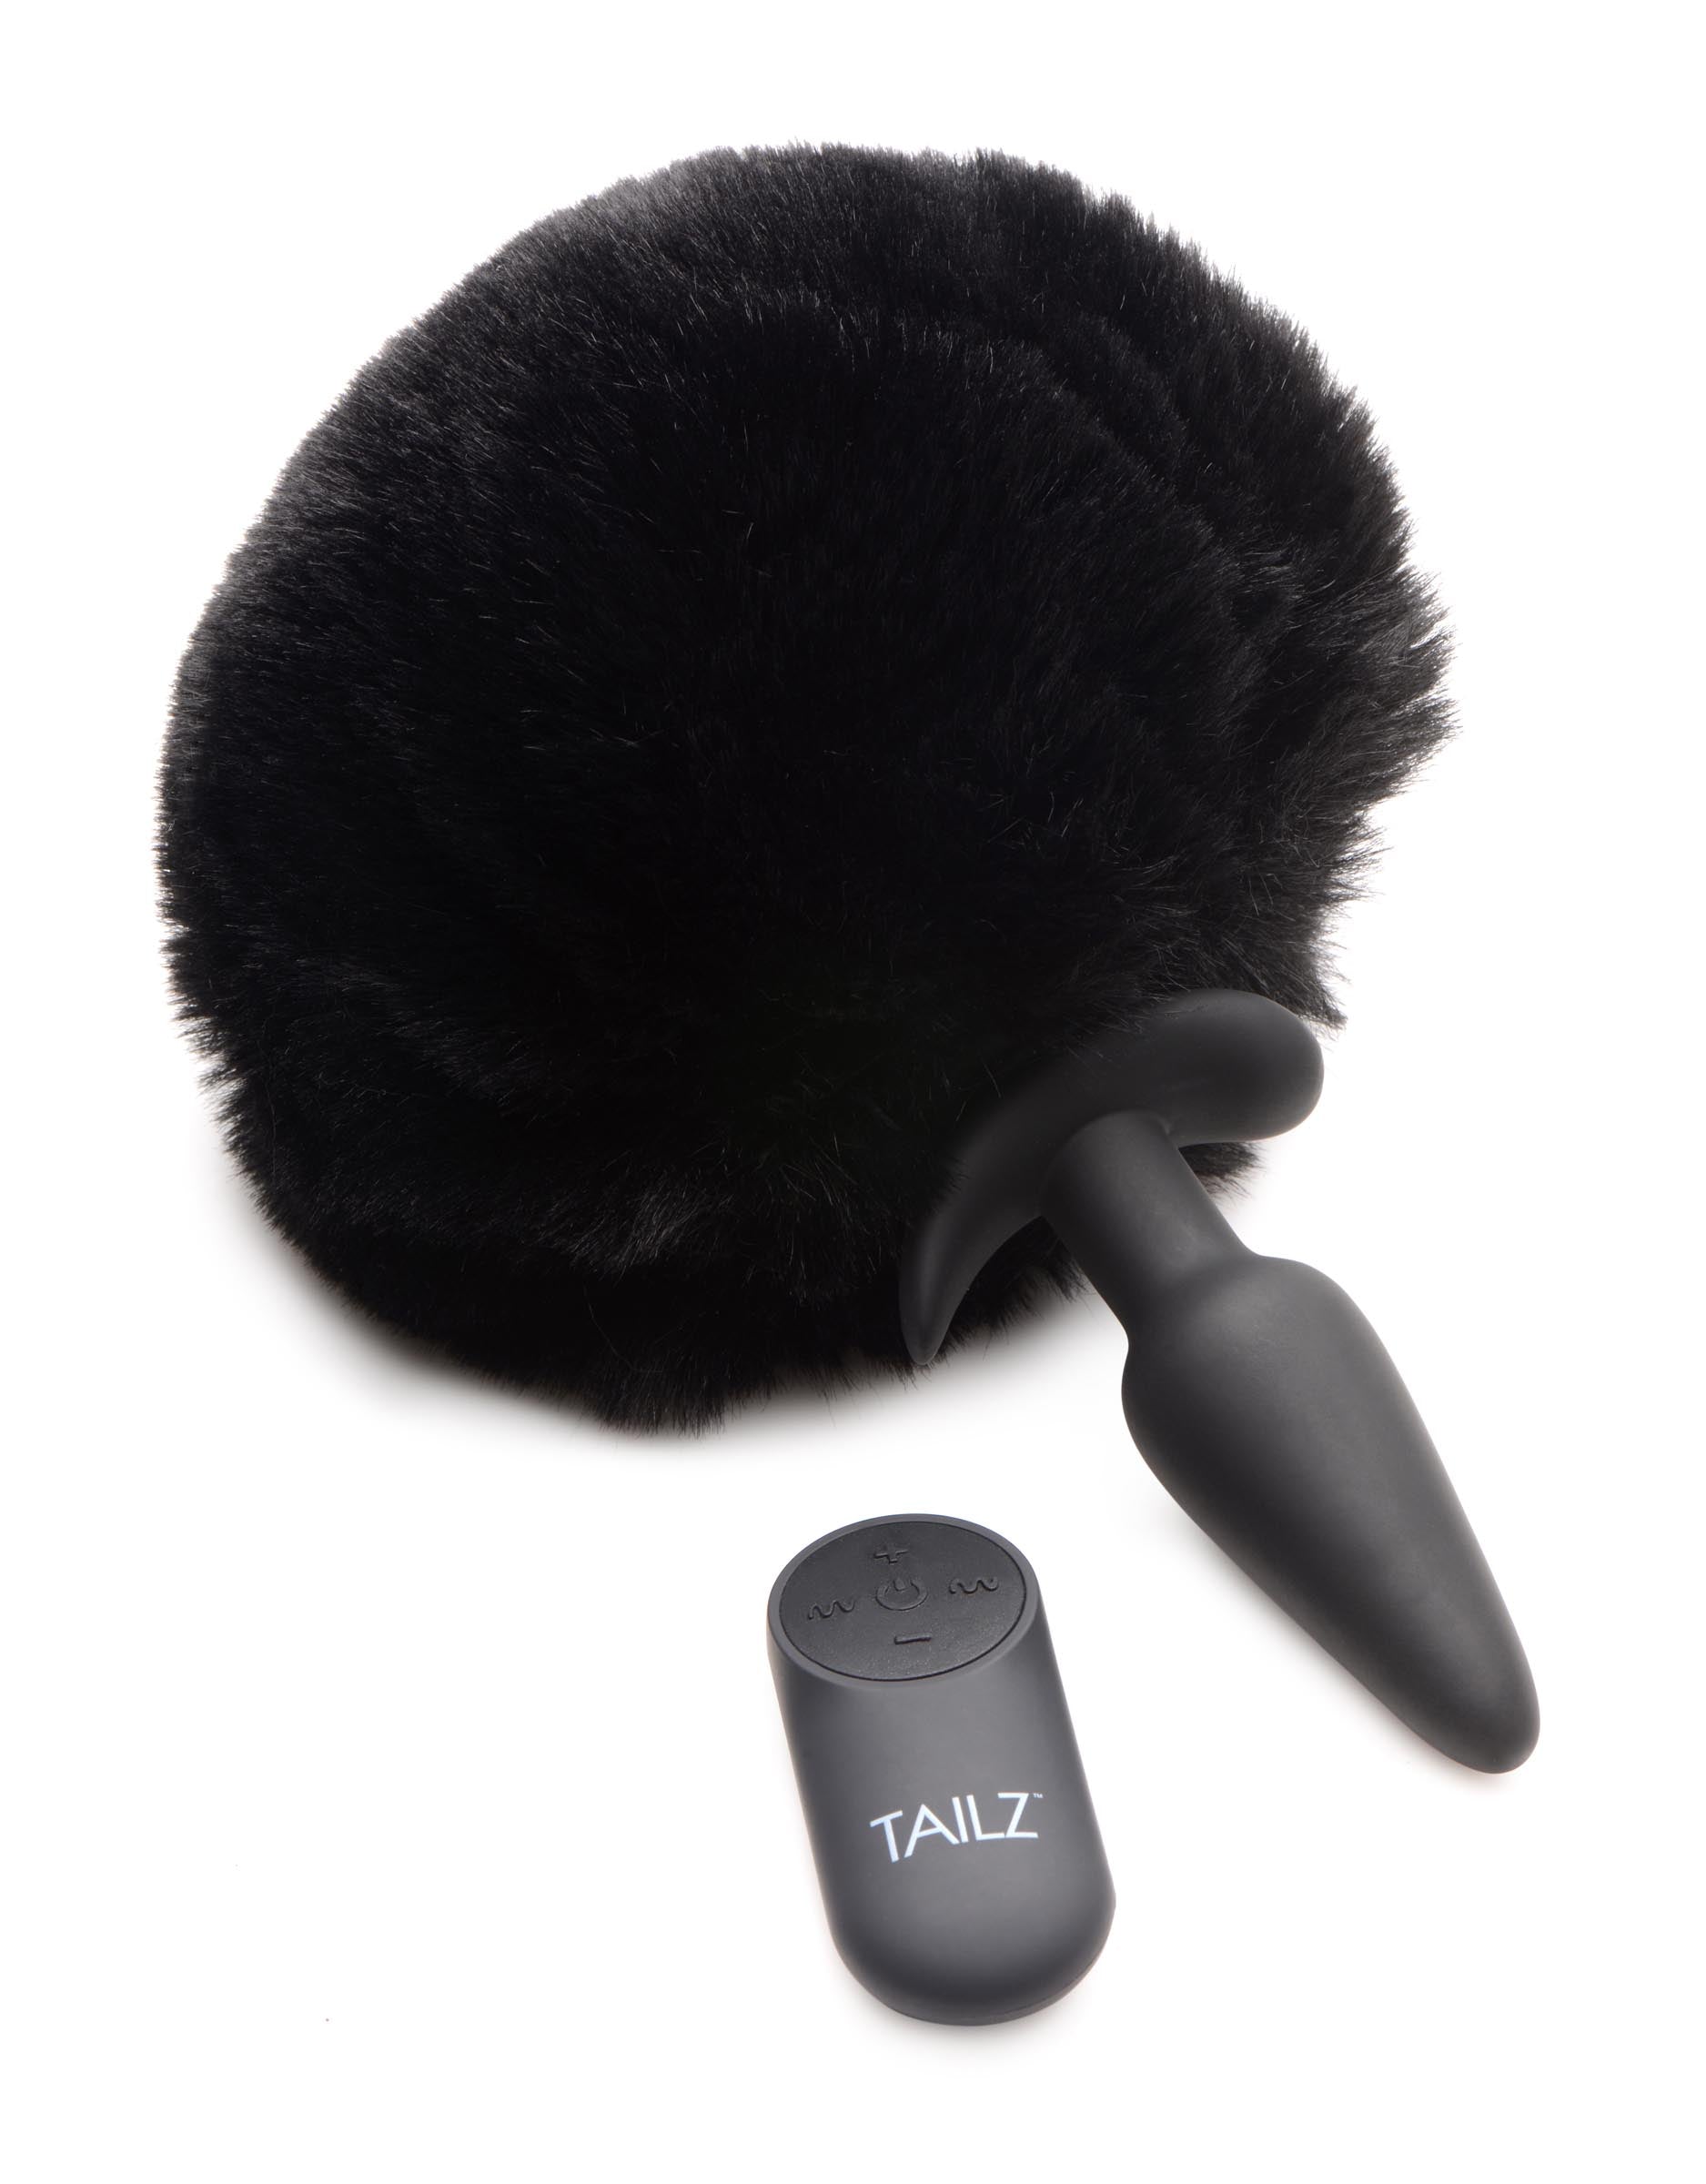 Large Vibrating Anal Plug with Interchangeable Bunny Tail - Black - UABDSM